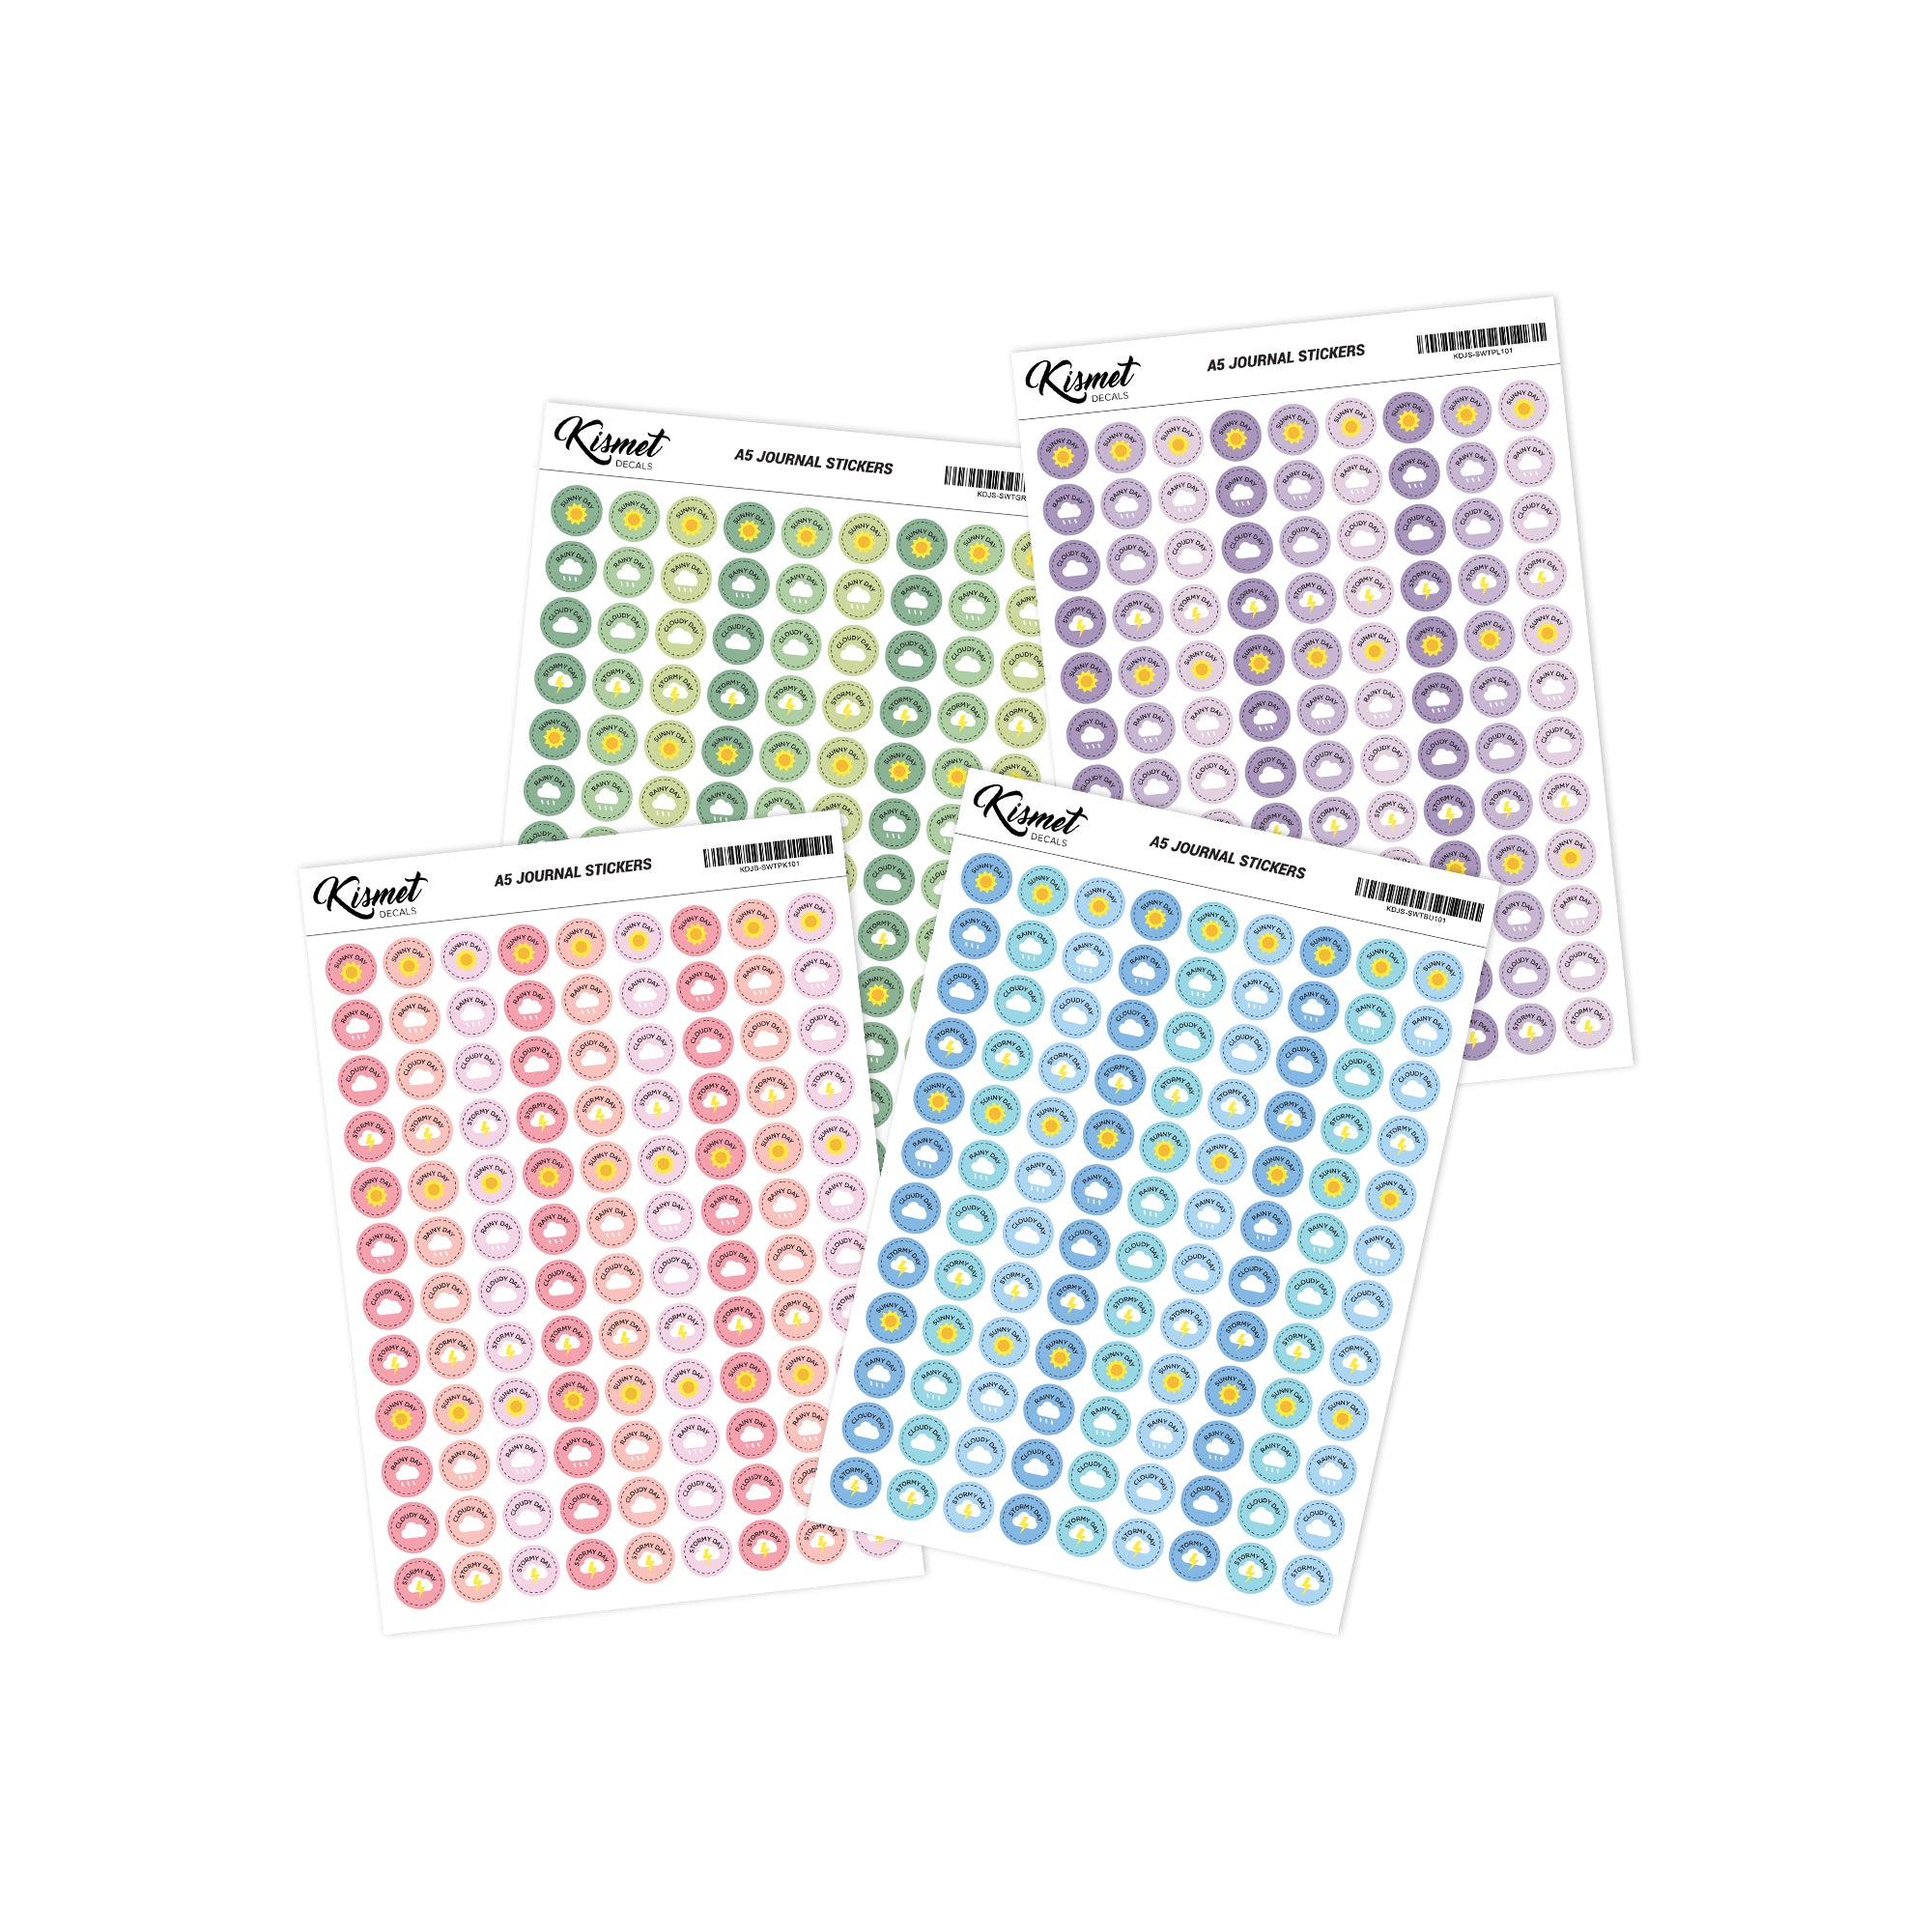 SUNNYHILL Sticker Collecting A5 Reusable Paper 100 Sheets 8.2 x 5.9  6-Hole (100 Sheets of Sticky Pages)